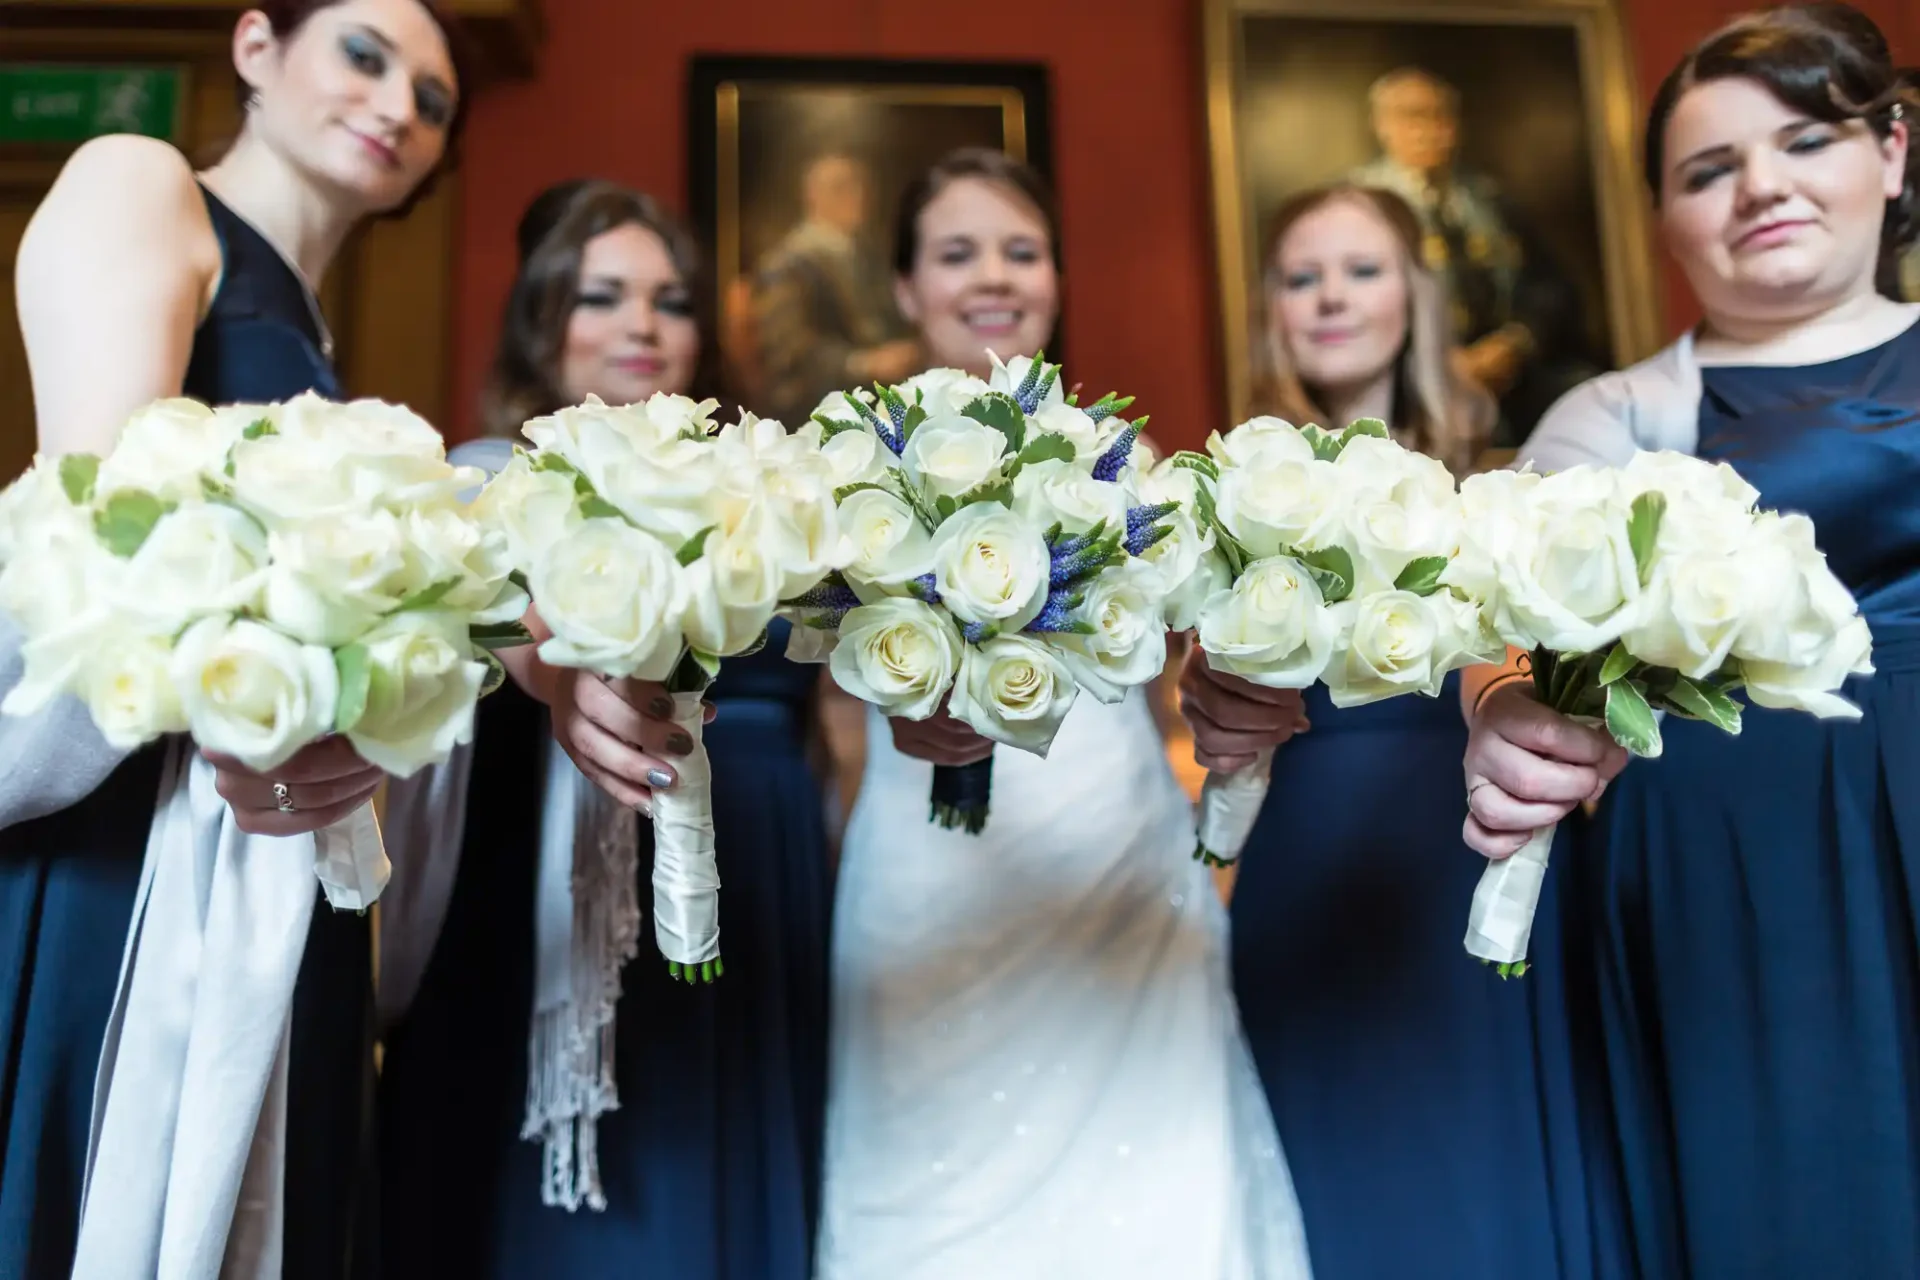 A bride and her bridesmaids in navy dresses posing with white and blue bouquet flowers, focused on the bouquets.